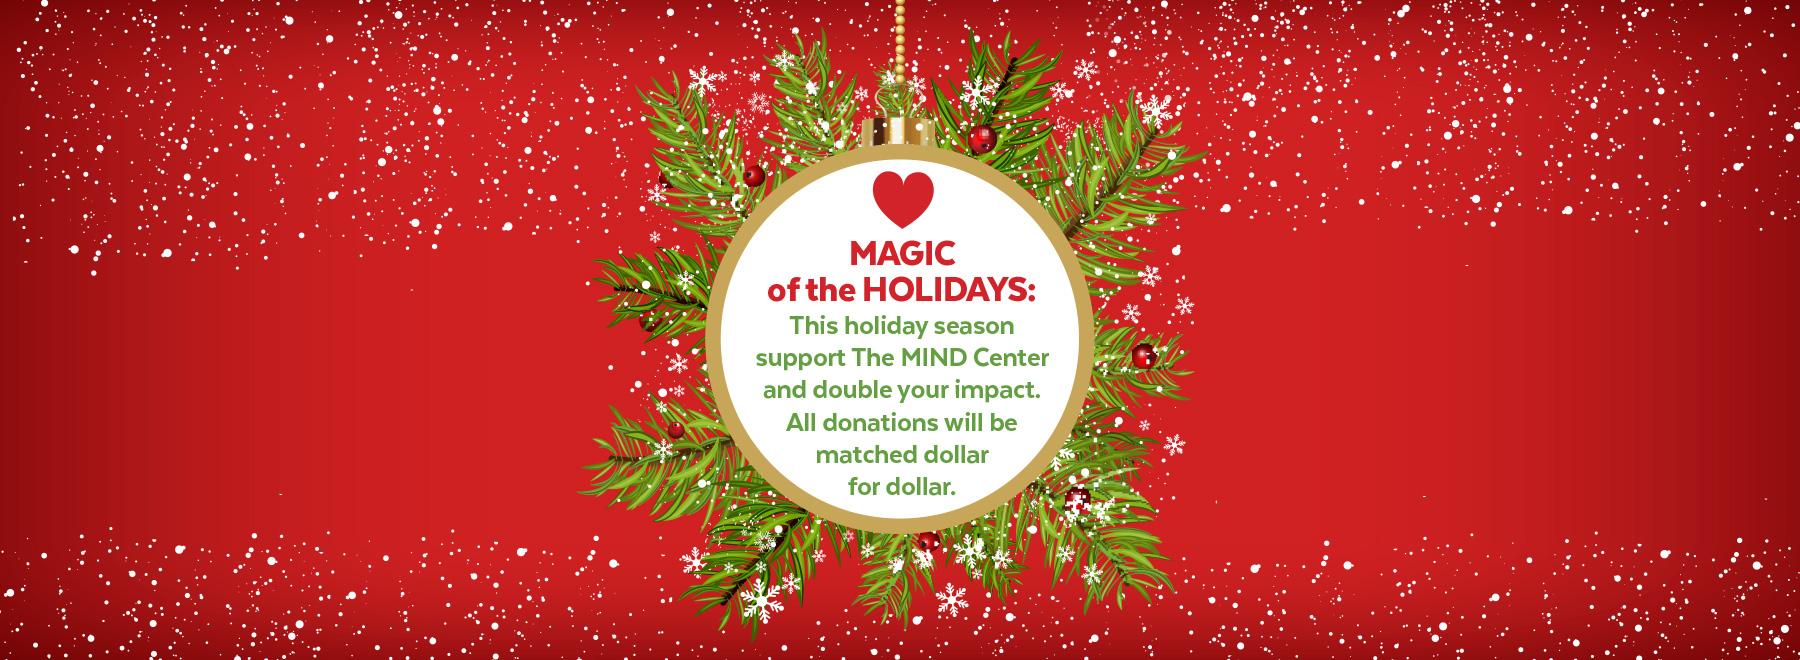 MAGIC of the Holidays: This holiday season support the MIND Center and double your impact. All donations will be matched dollar for dollar.